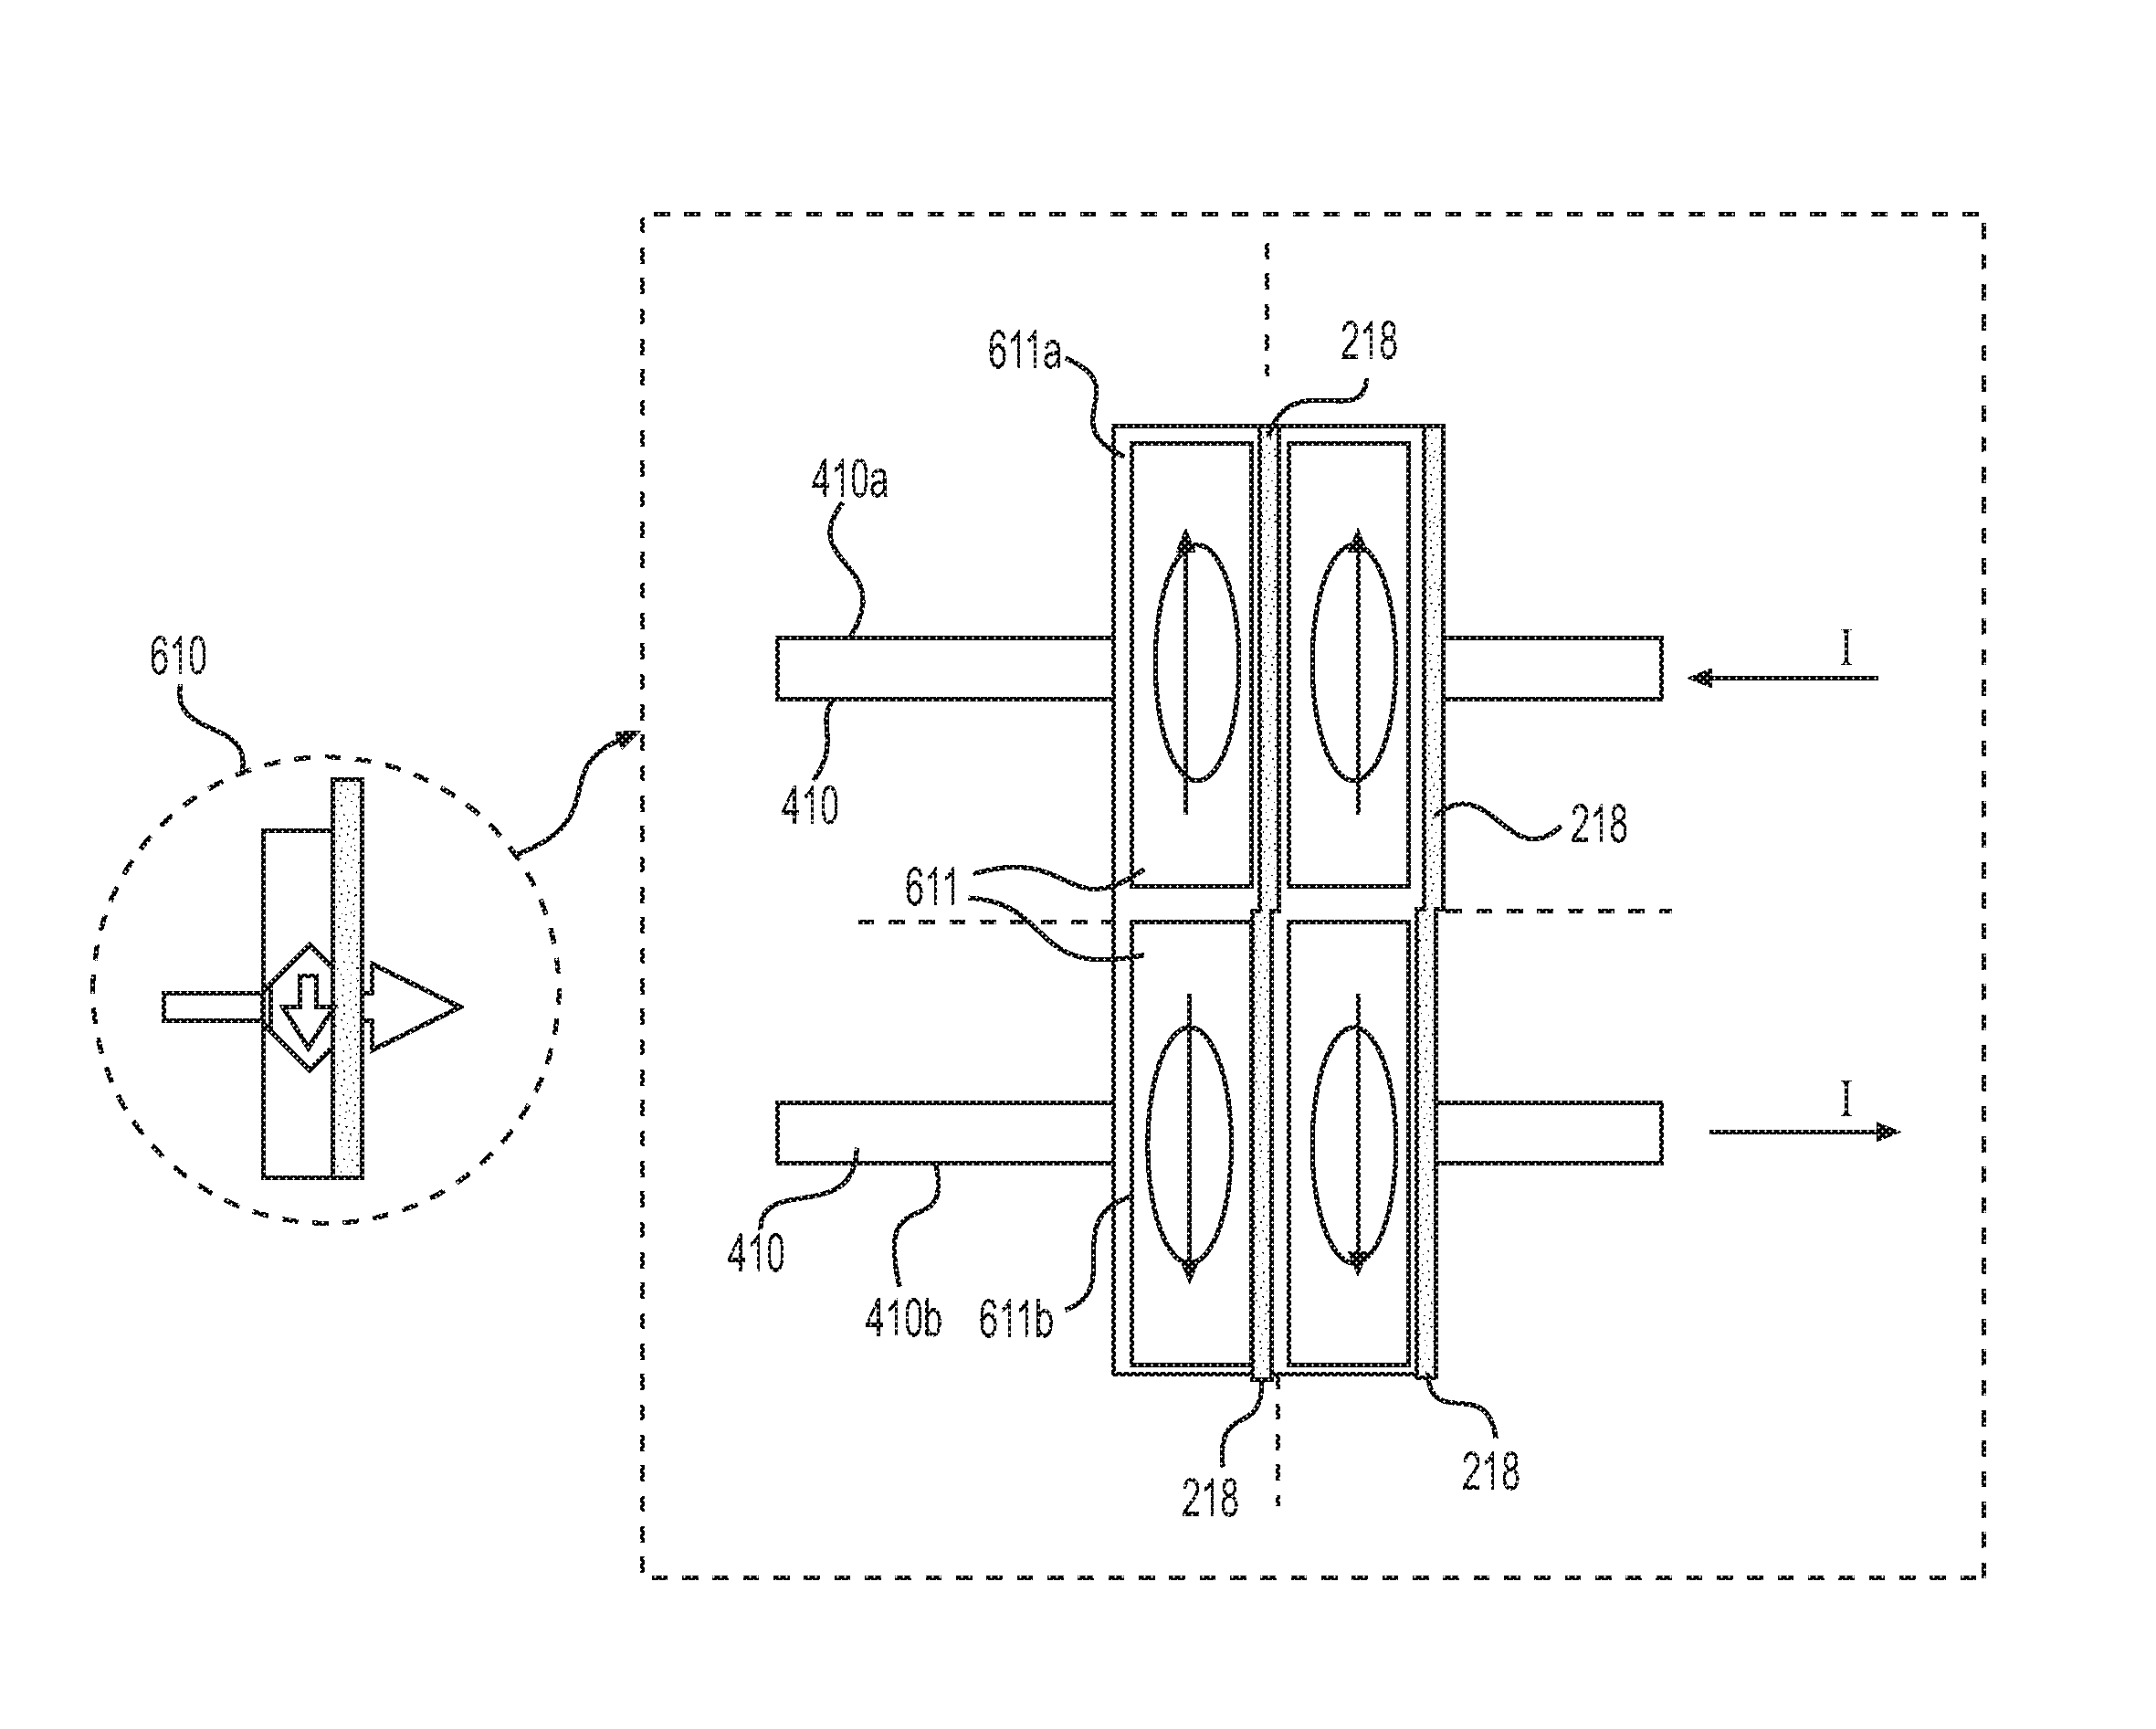 Magnetic field sensor with increased linearity